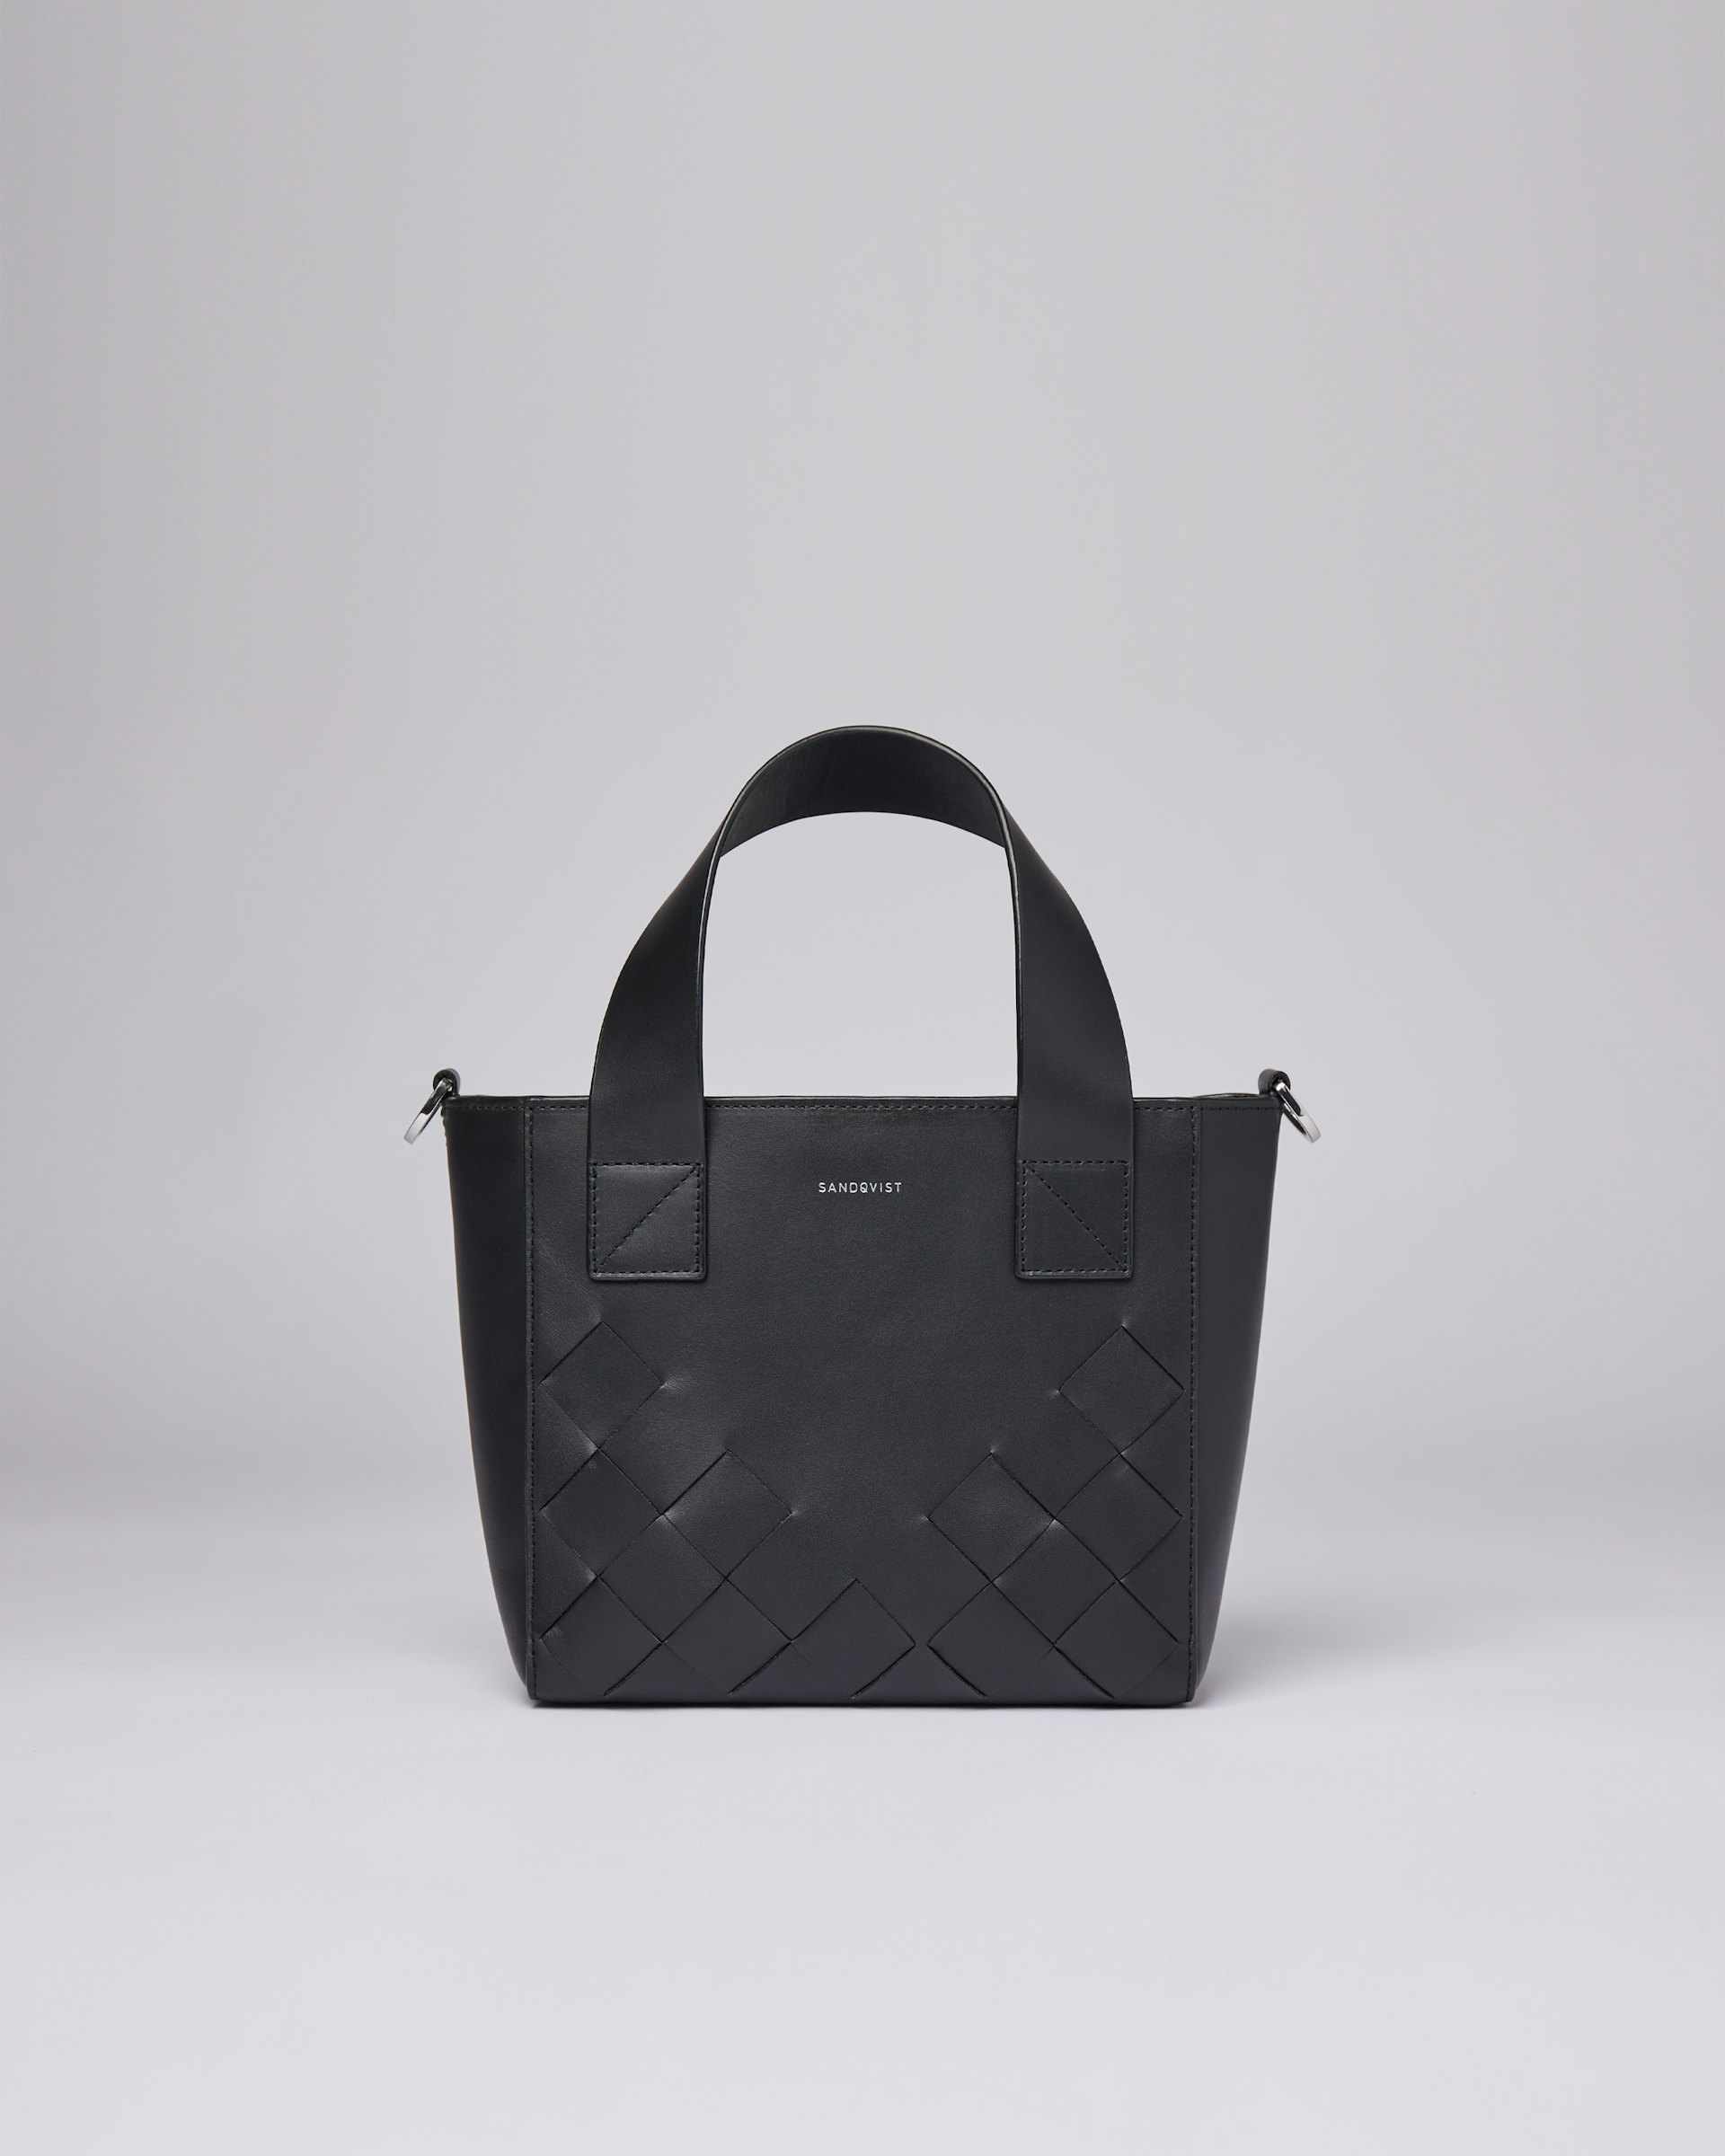 Cecilia weave belongs to the category Sacs bandoulières and is in color black